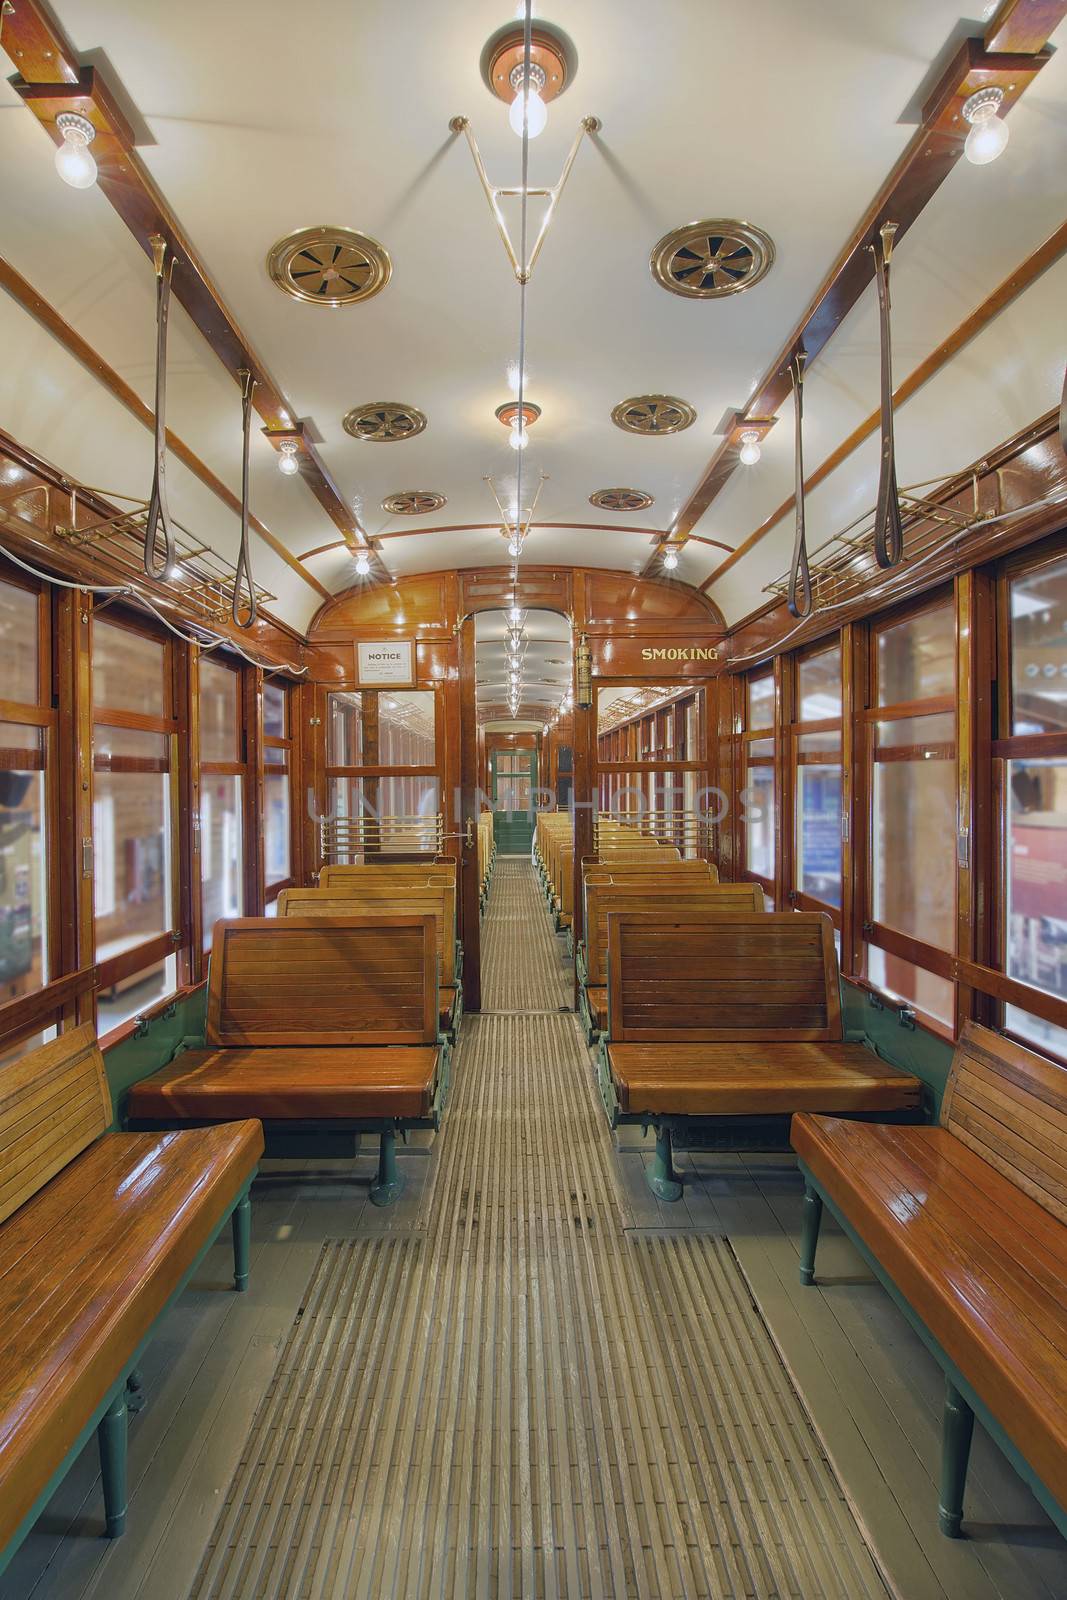 Old Historic Restored Tram Interior with Wood Bench Seats in Gentleman Smoking Section